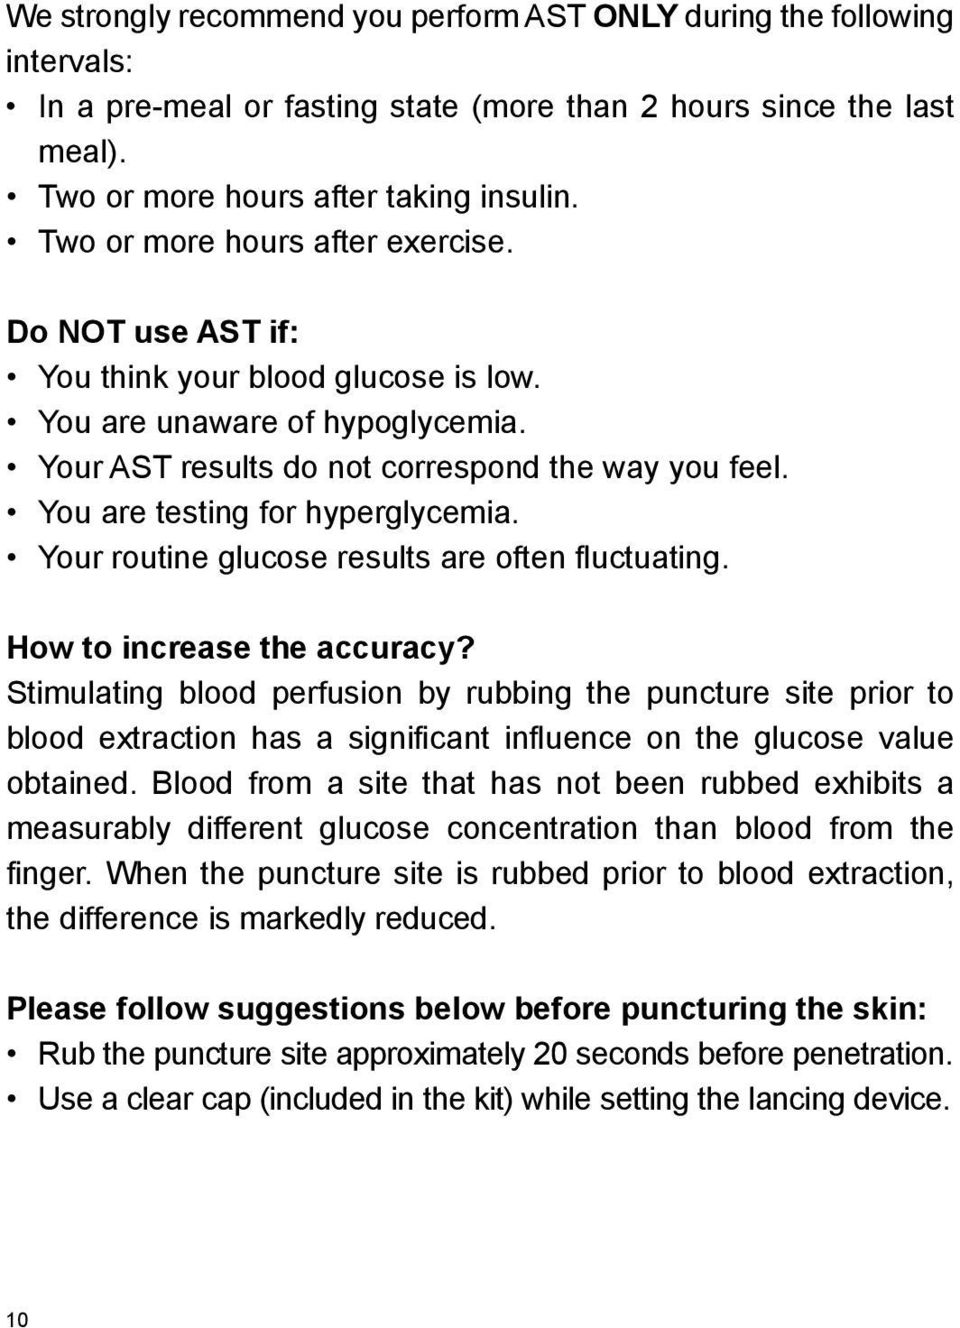 You are testing for hyperglycemia. Your routine glucose results are often fluctuating. How to increase the accuracy?